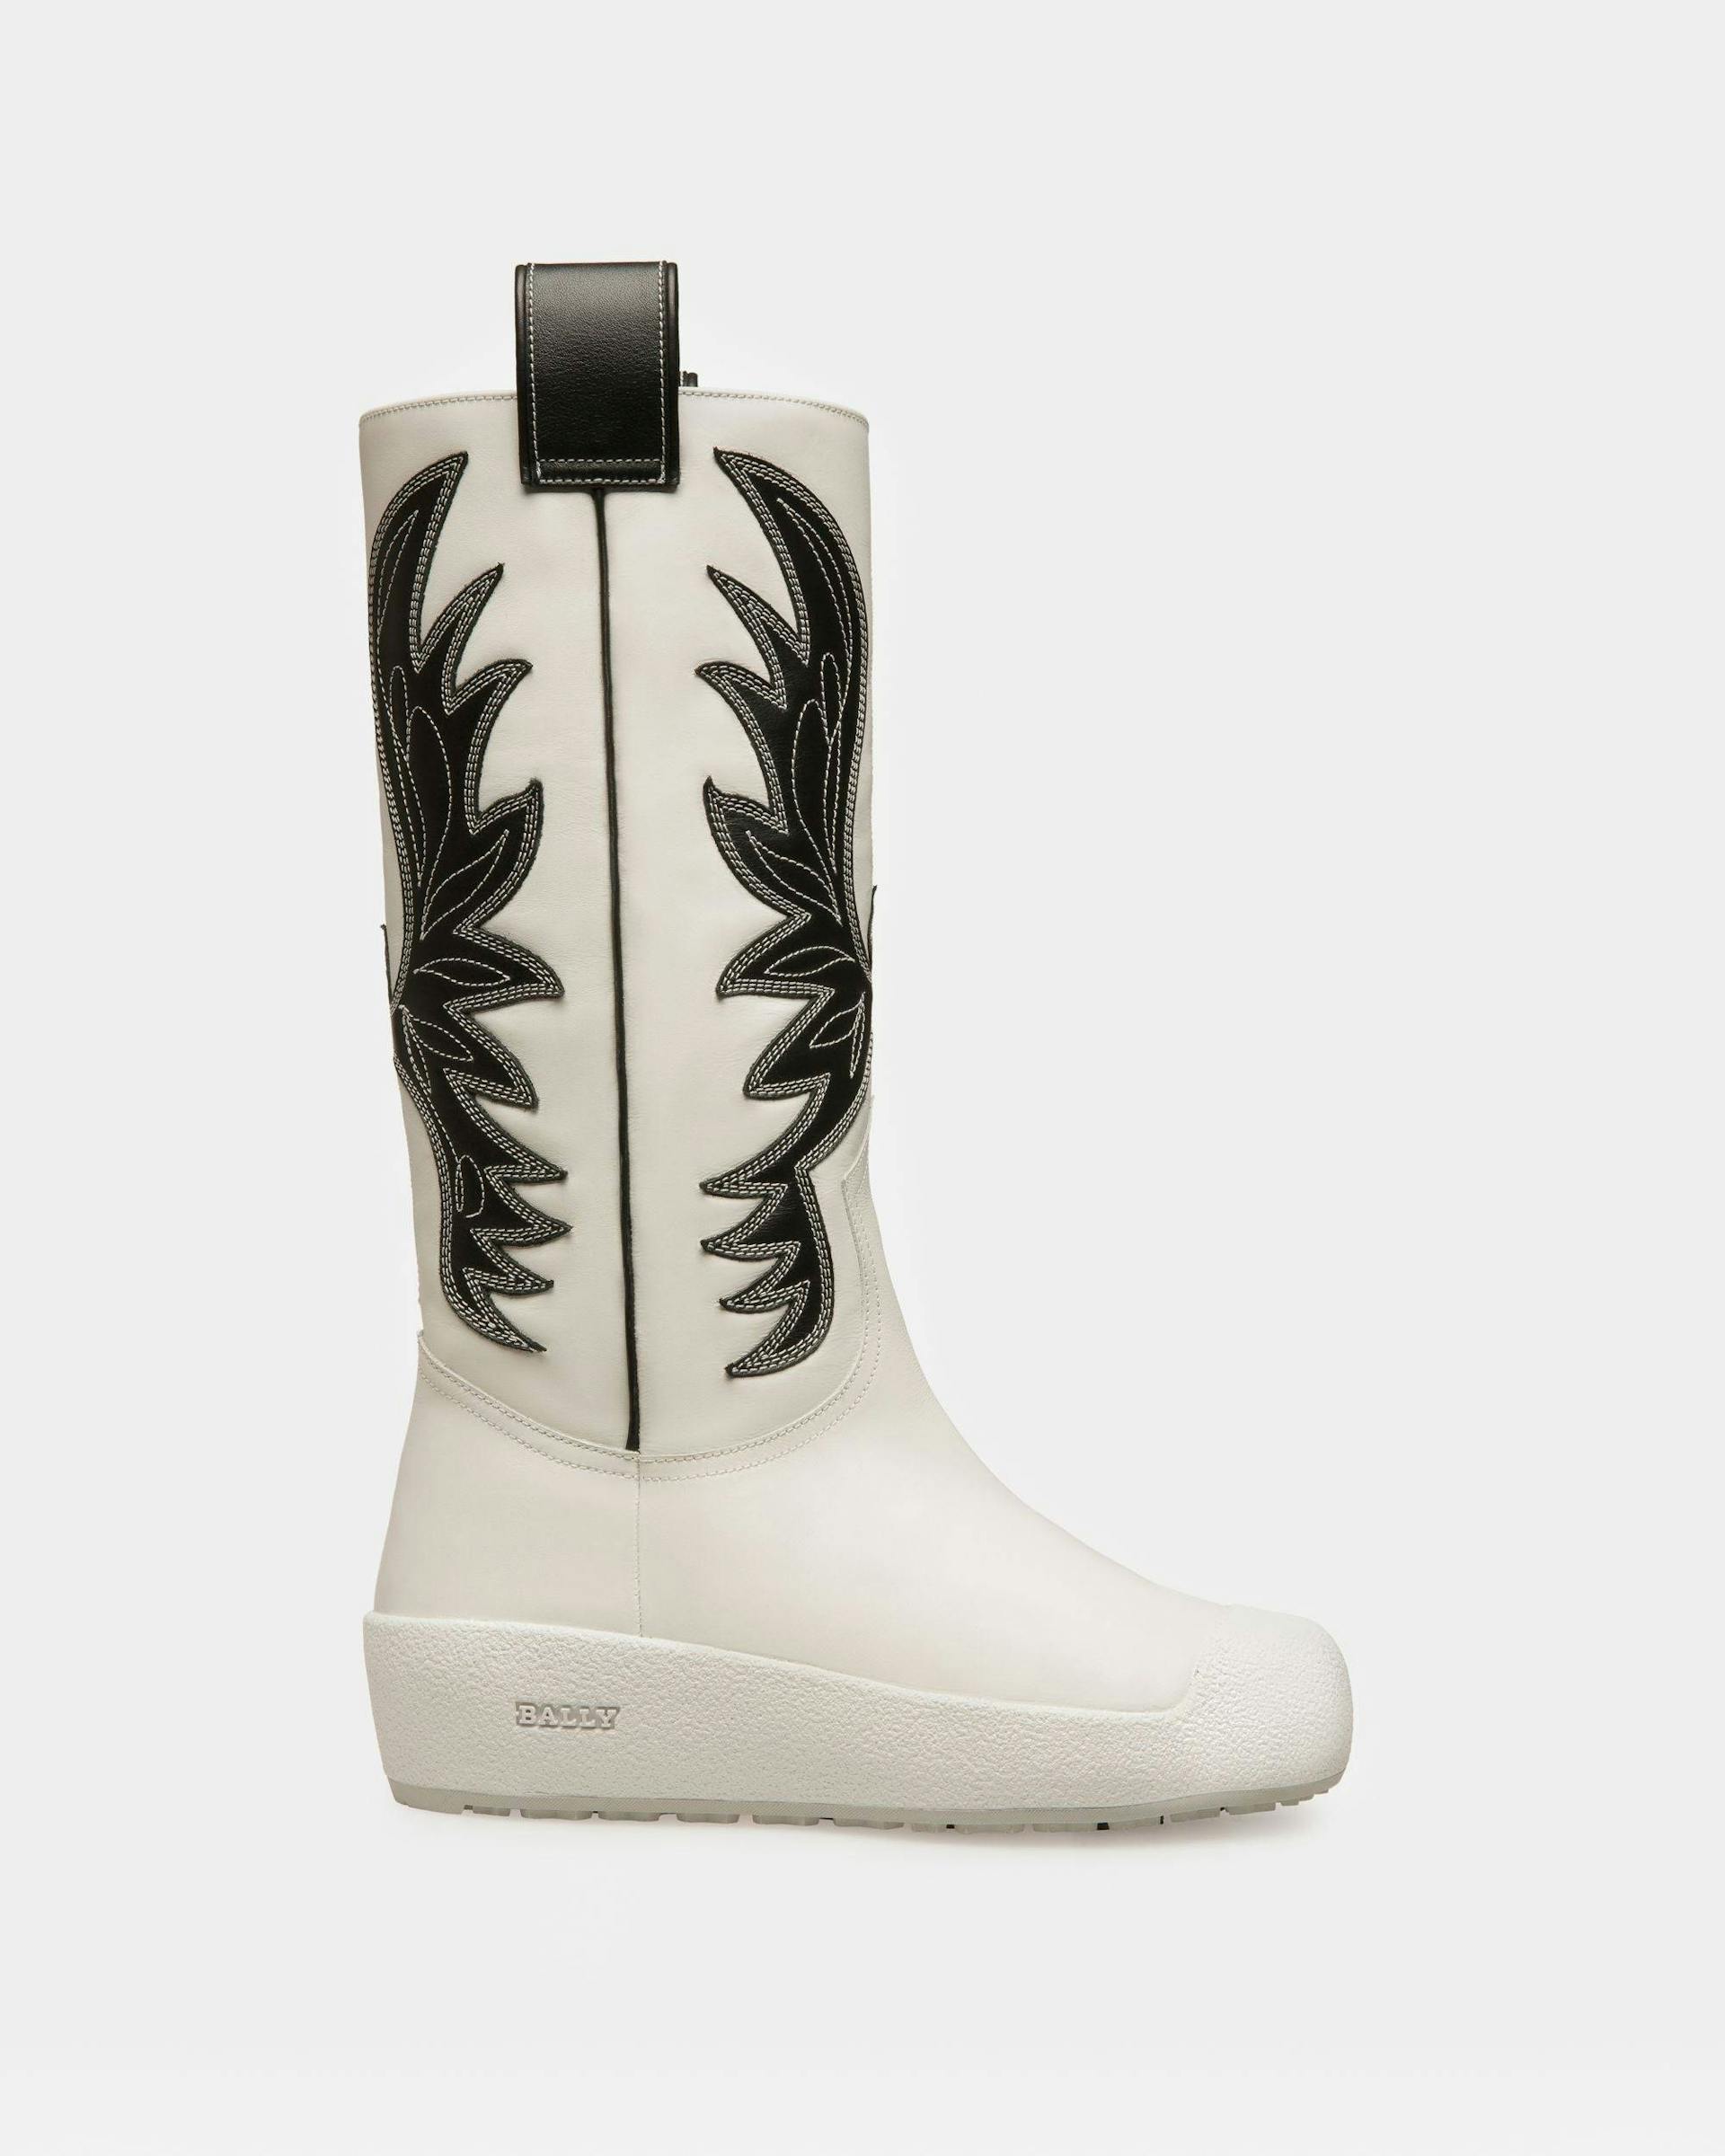 Chambery Leather Long Boots In White & Black - Women's - Bally - 01